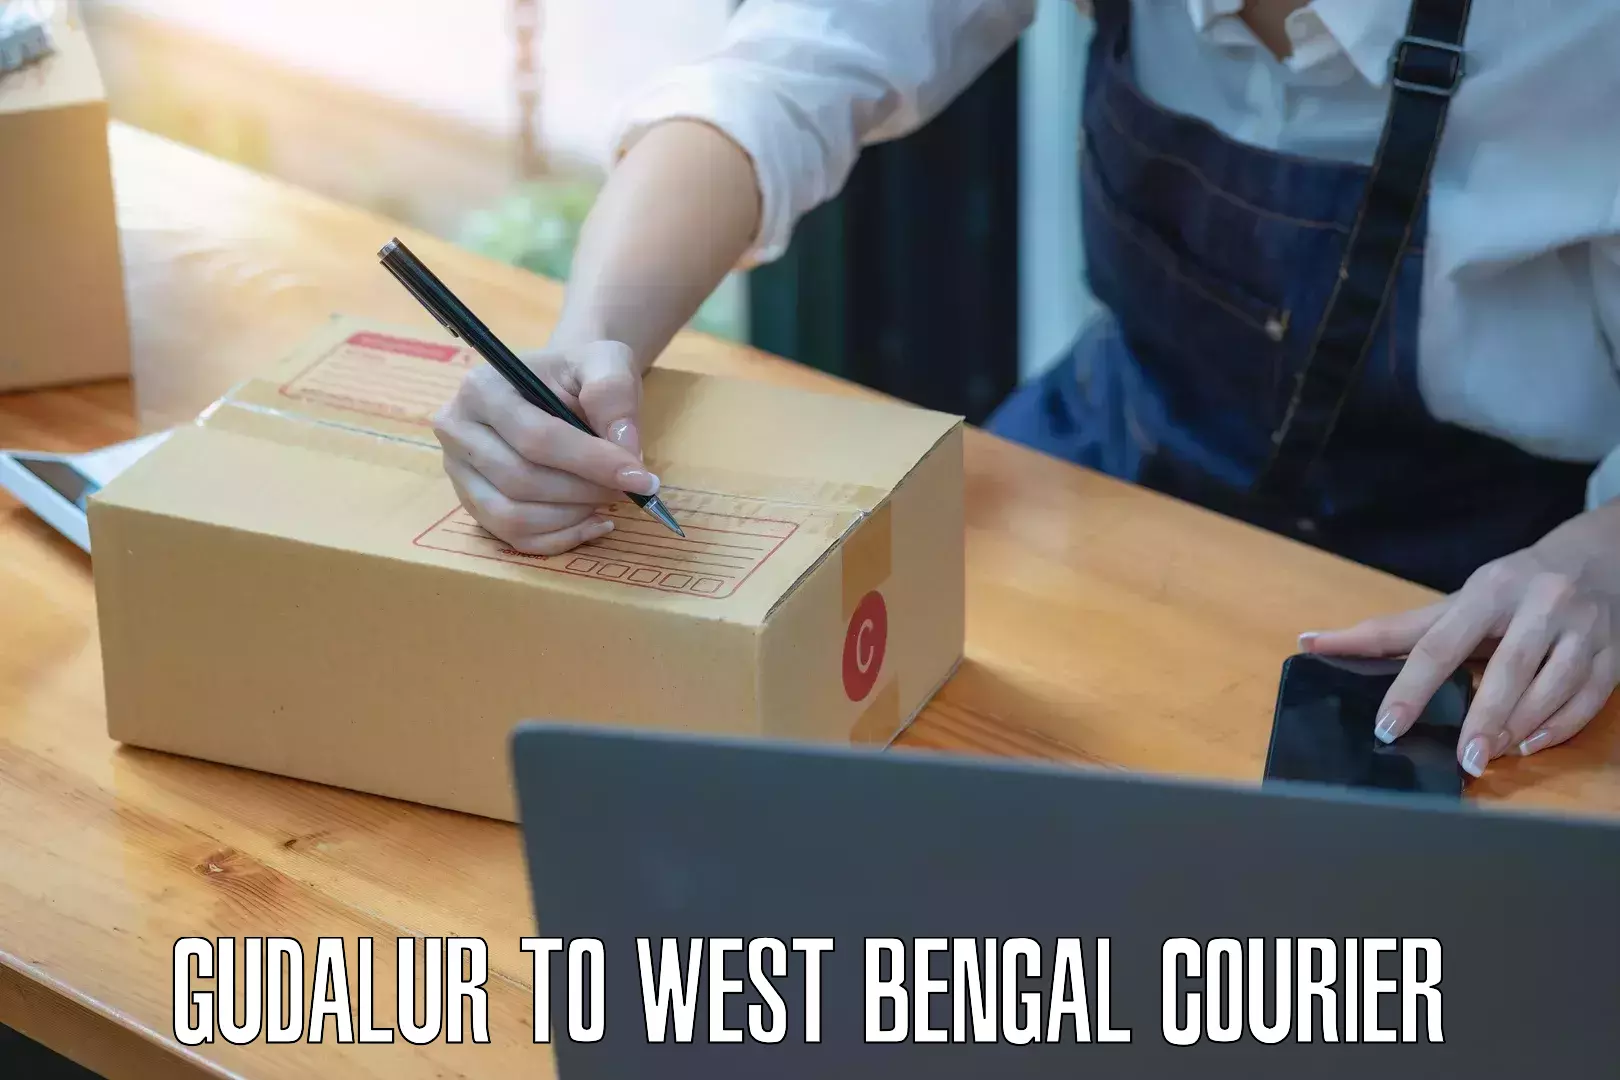 International parcel service Gudalur to West Bengal